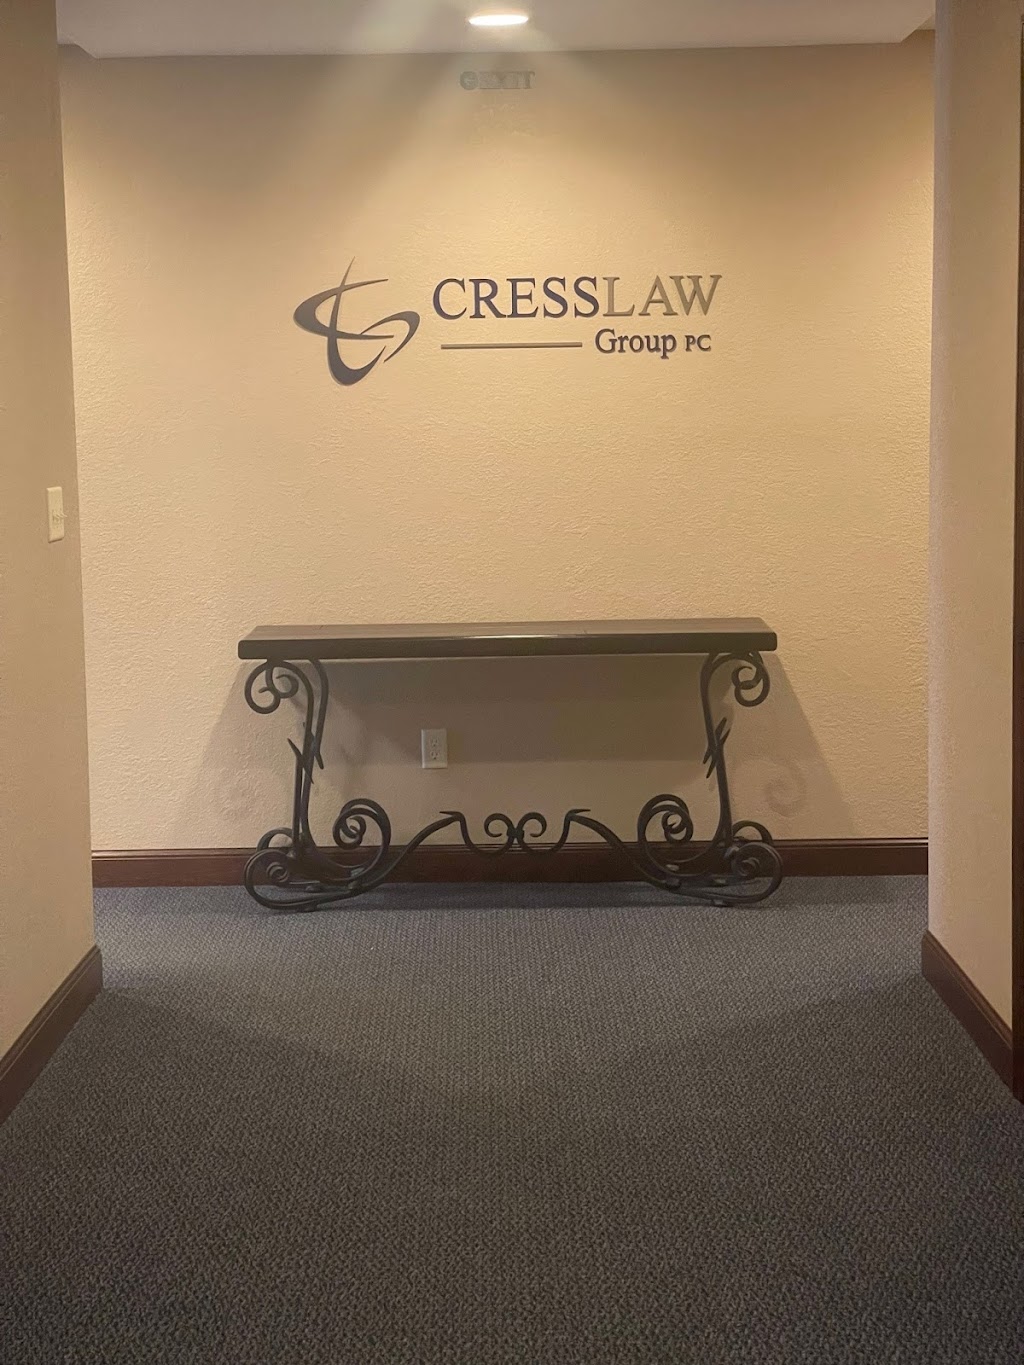 Cress Law Group PC | 430 N Wayne St STE 1A, Angola, IN 46703, USA | Phone: (260) 200-5727